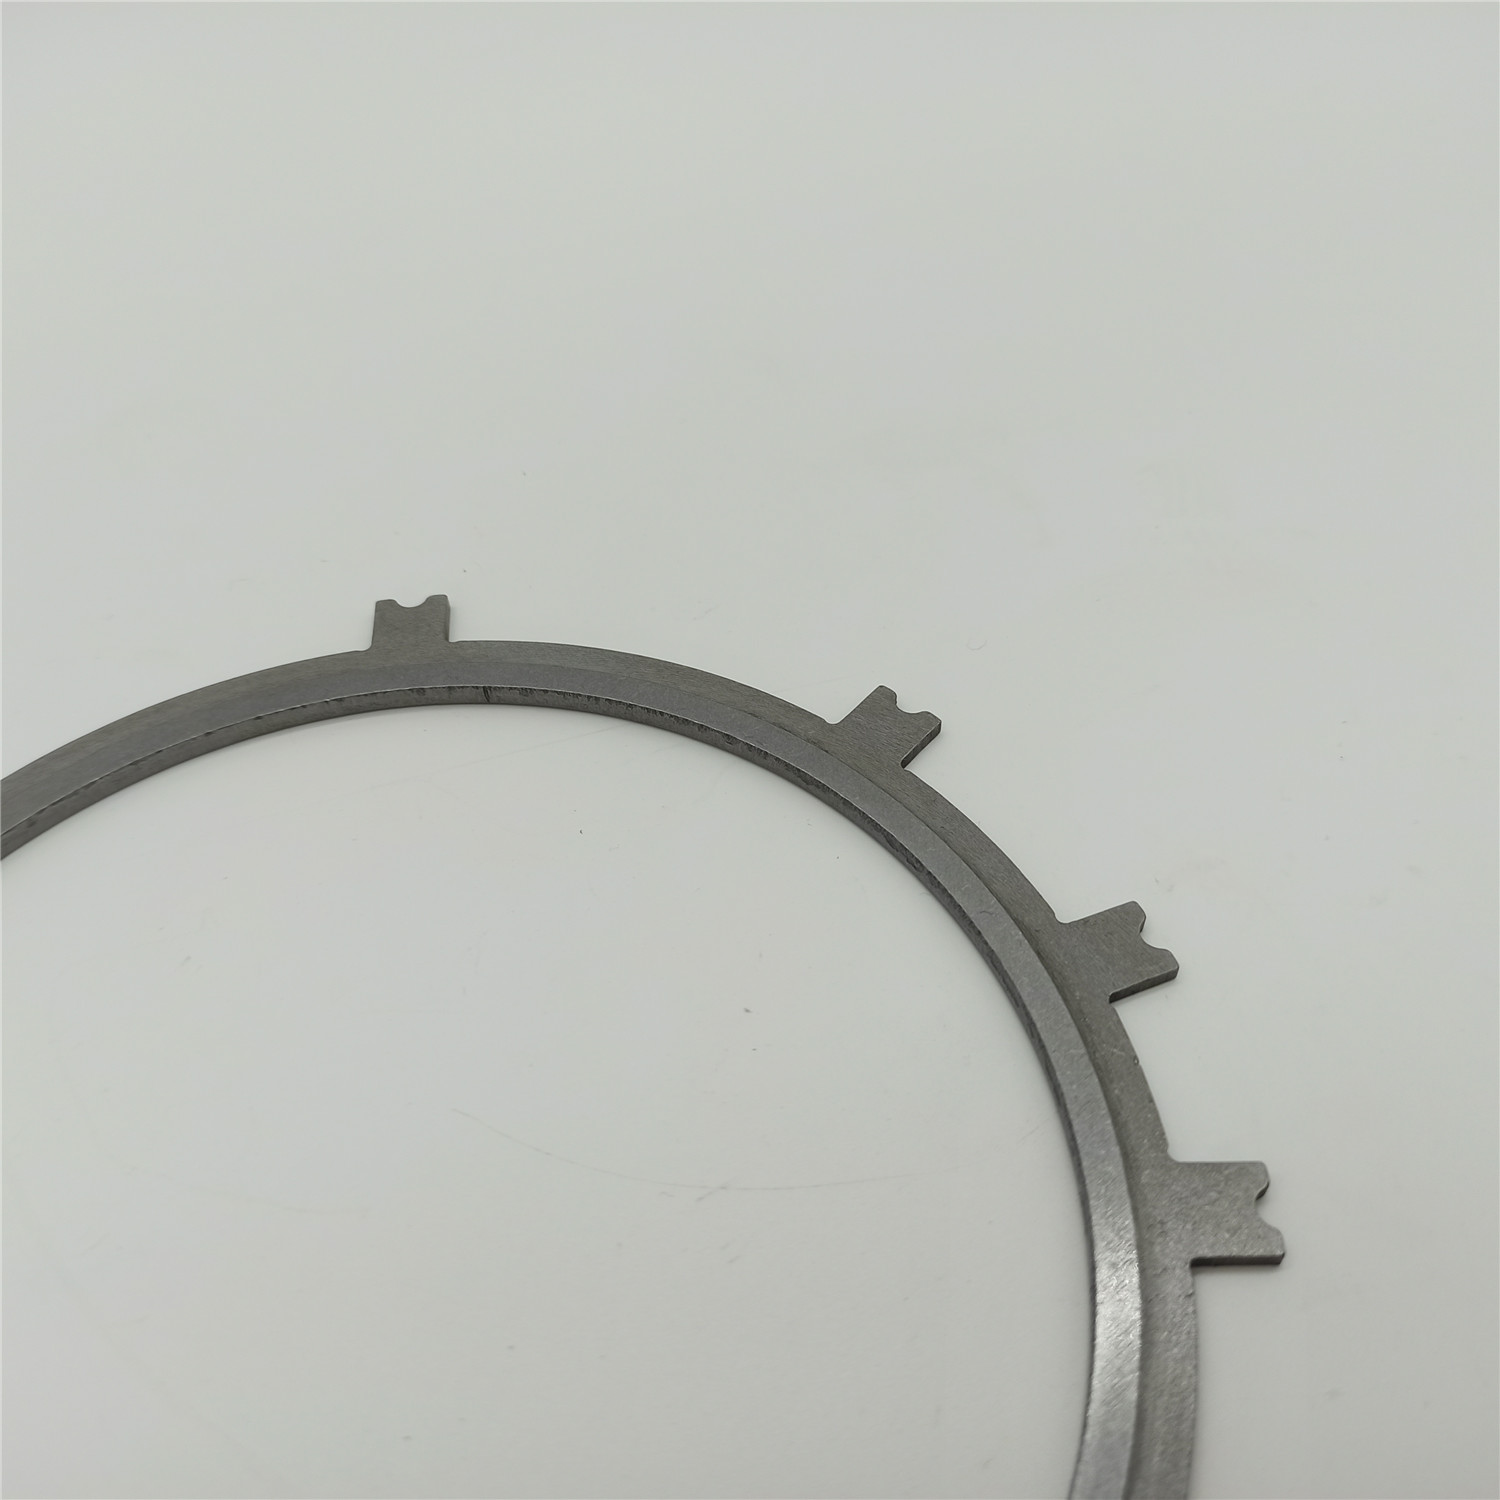 A6GF1 automatic transmission pressure plate fit in 4562526610 A6GF1-0001-AM fit for /Hyundai